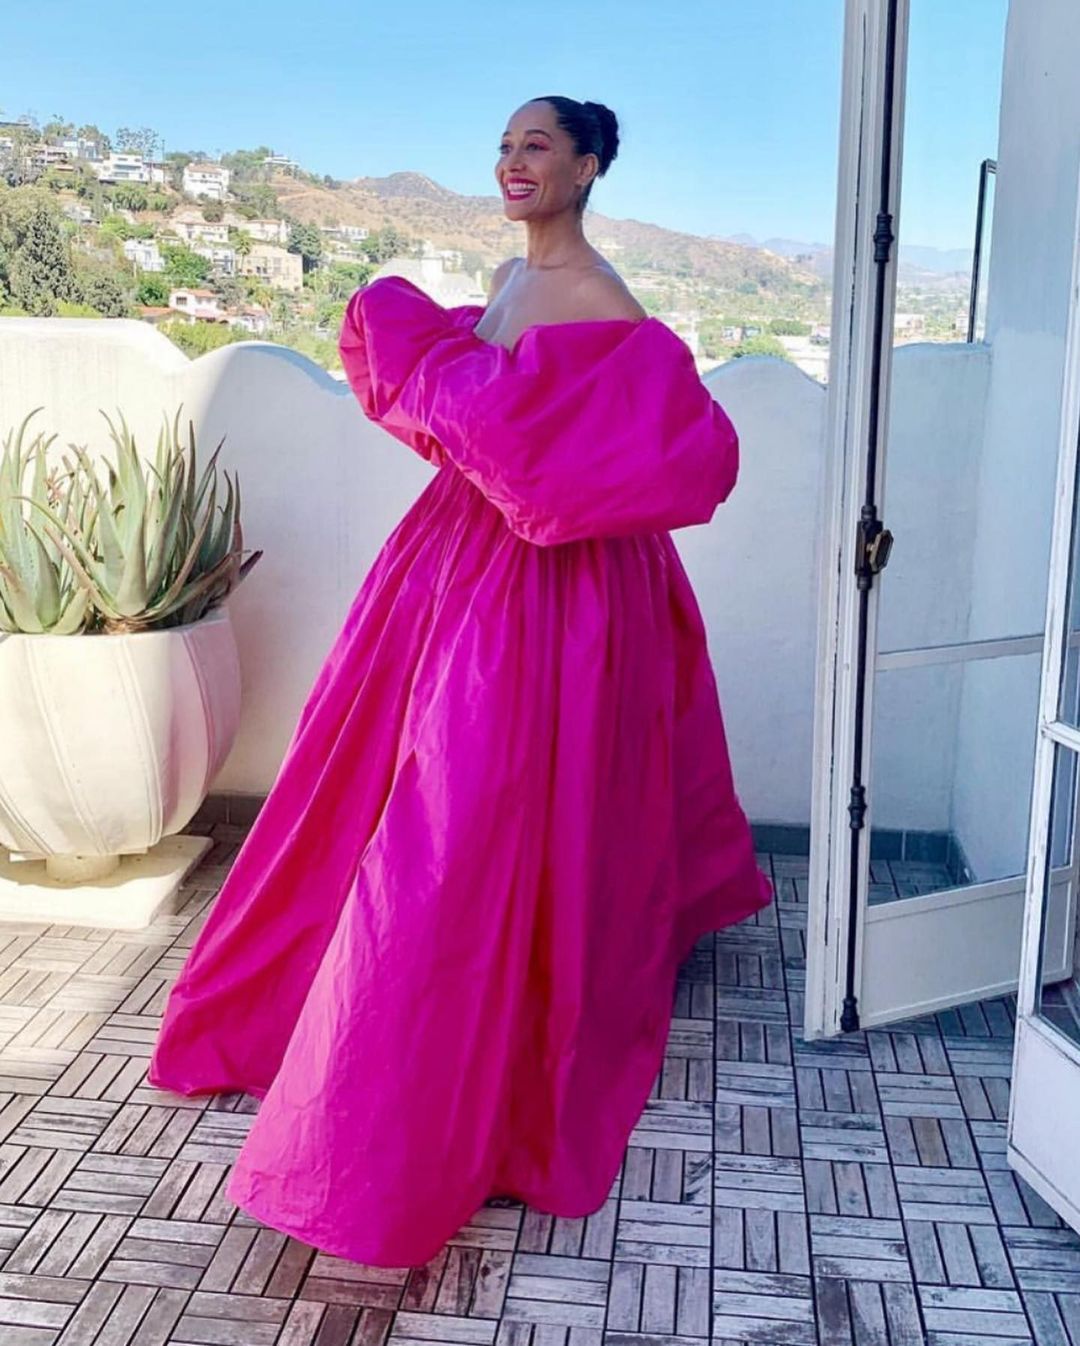 Tracee Ellis Ross Honored As Style Icon At The 2020 People's Choice Awards